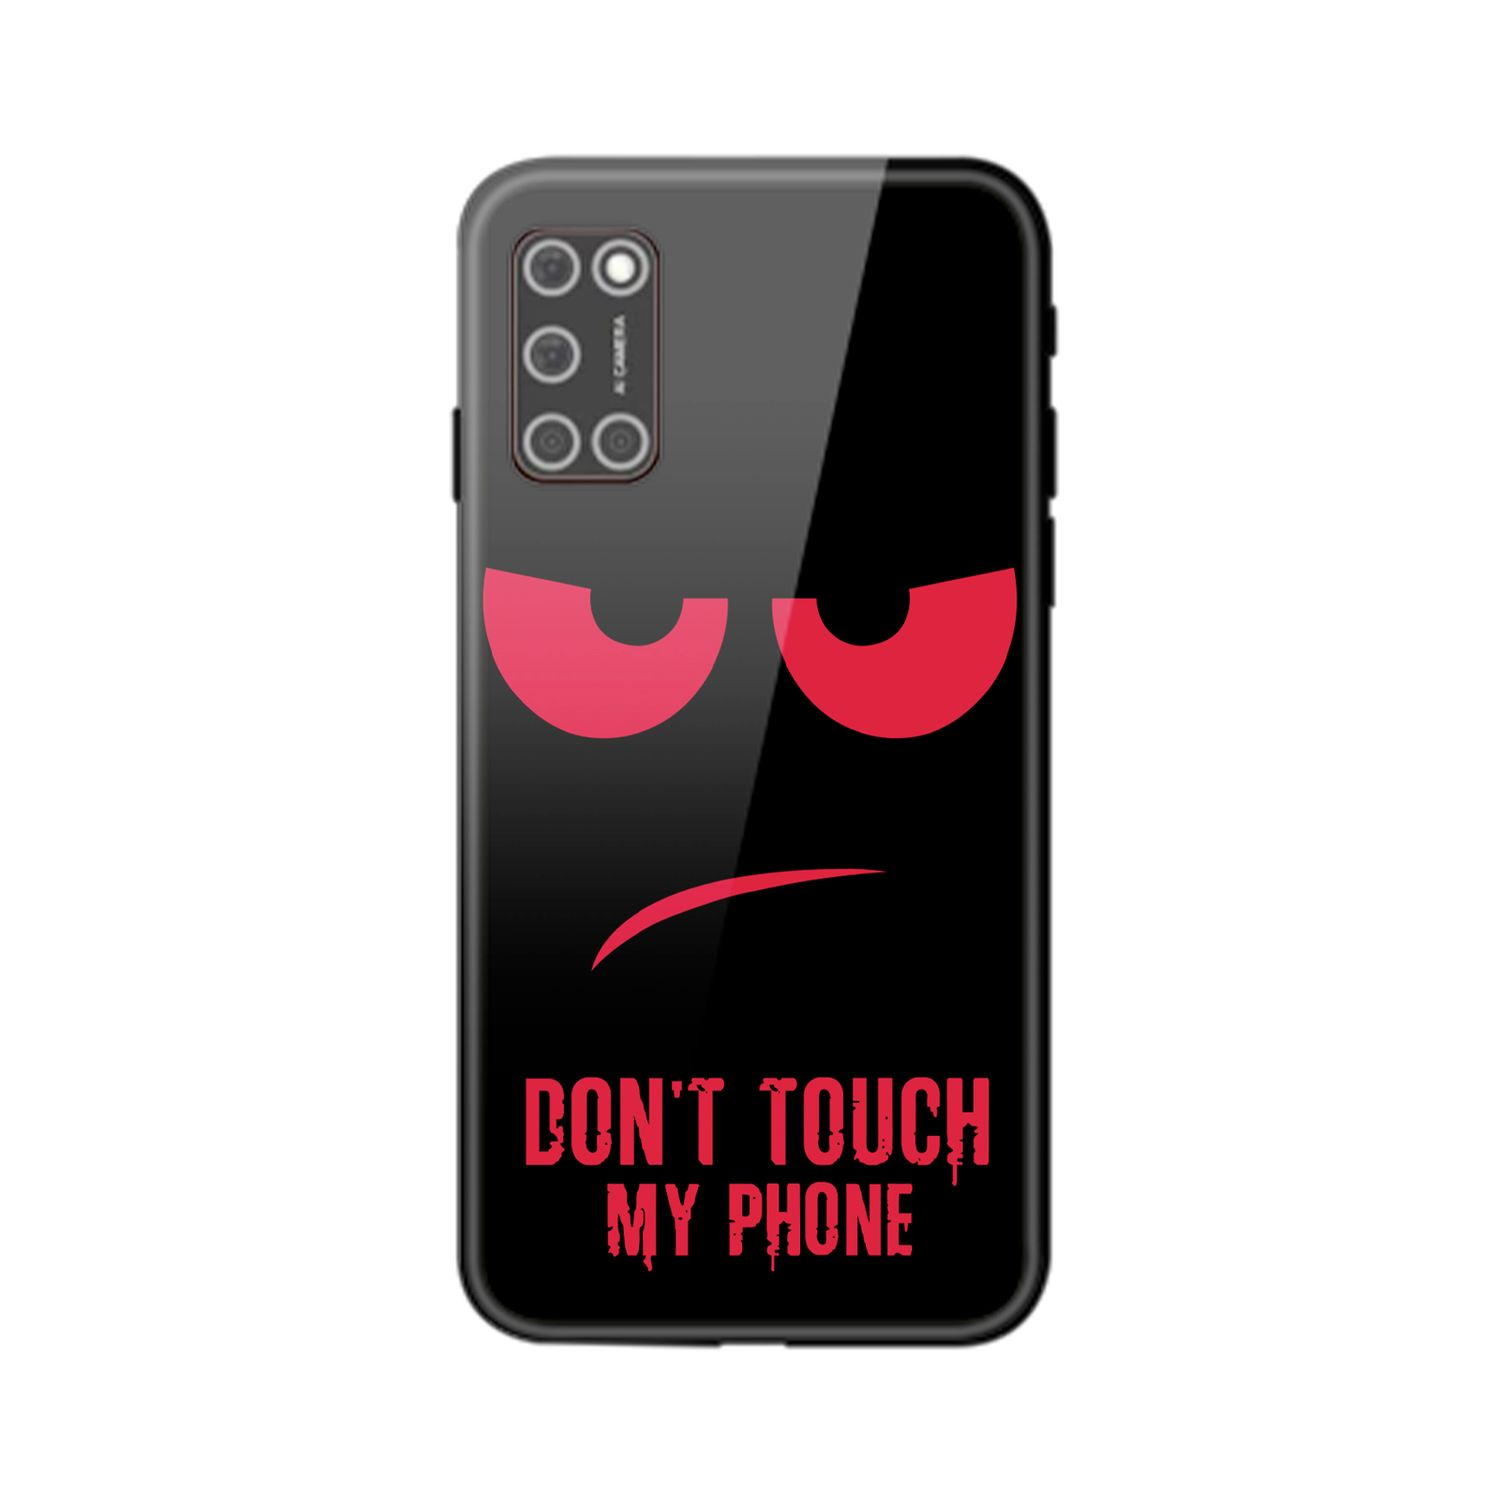 Backcover, realme, Phone My Touch Dont KÖNIG DESIGN Case, Rot C35,